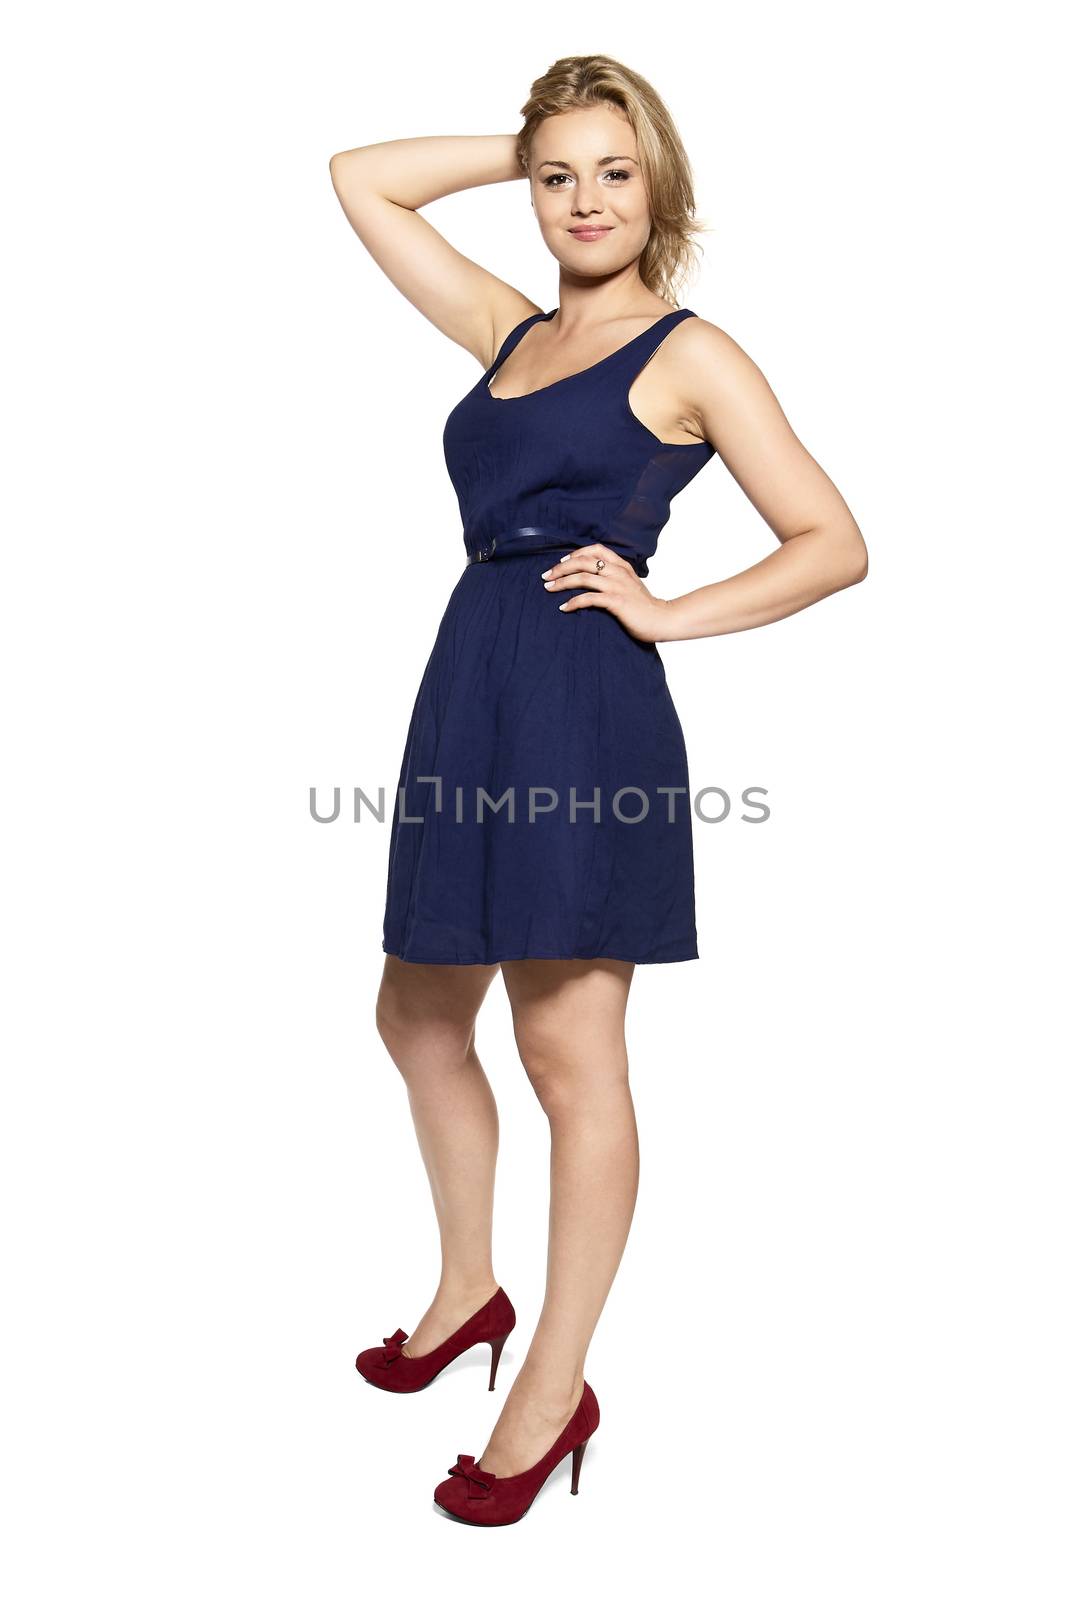 Cheerful young blonde woman in navy blue dress isolated on white background.